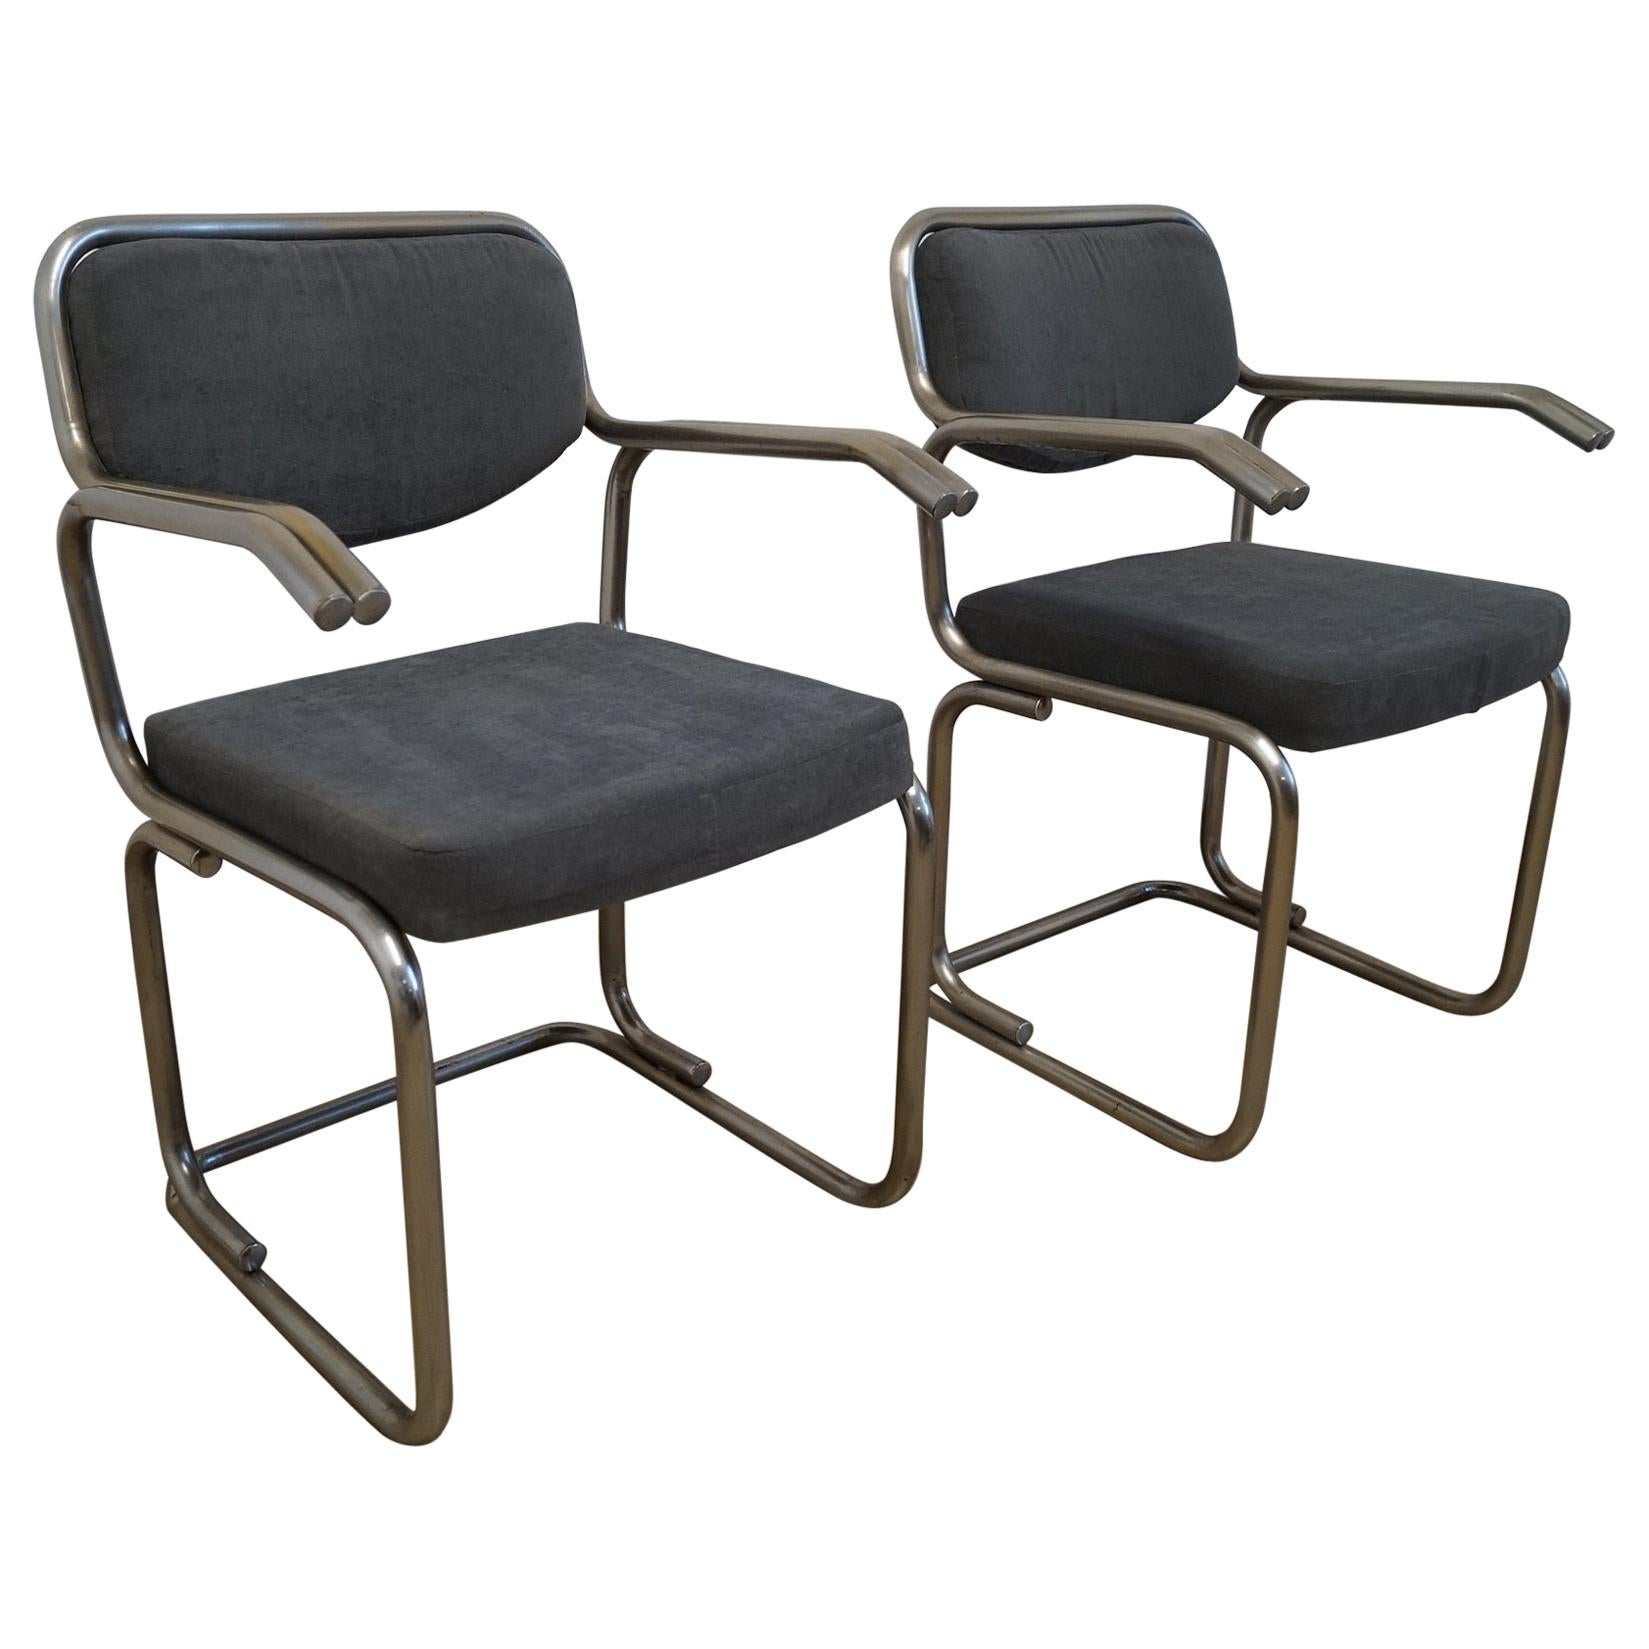 Two Armchair from 1960